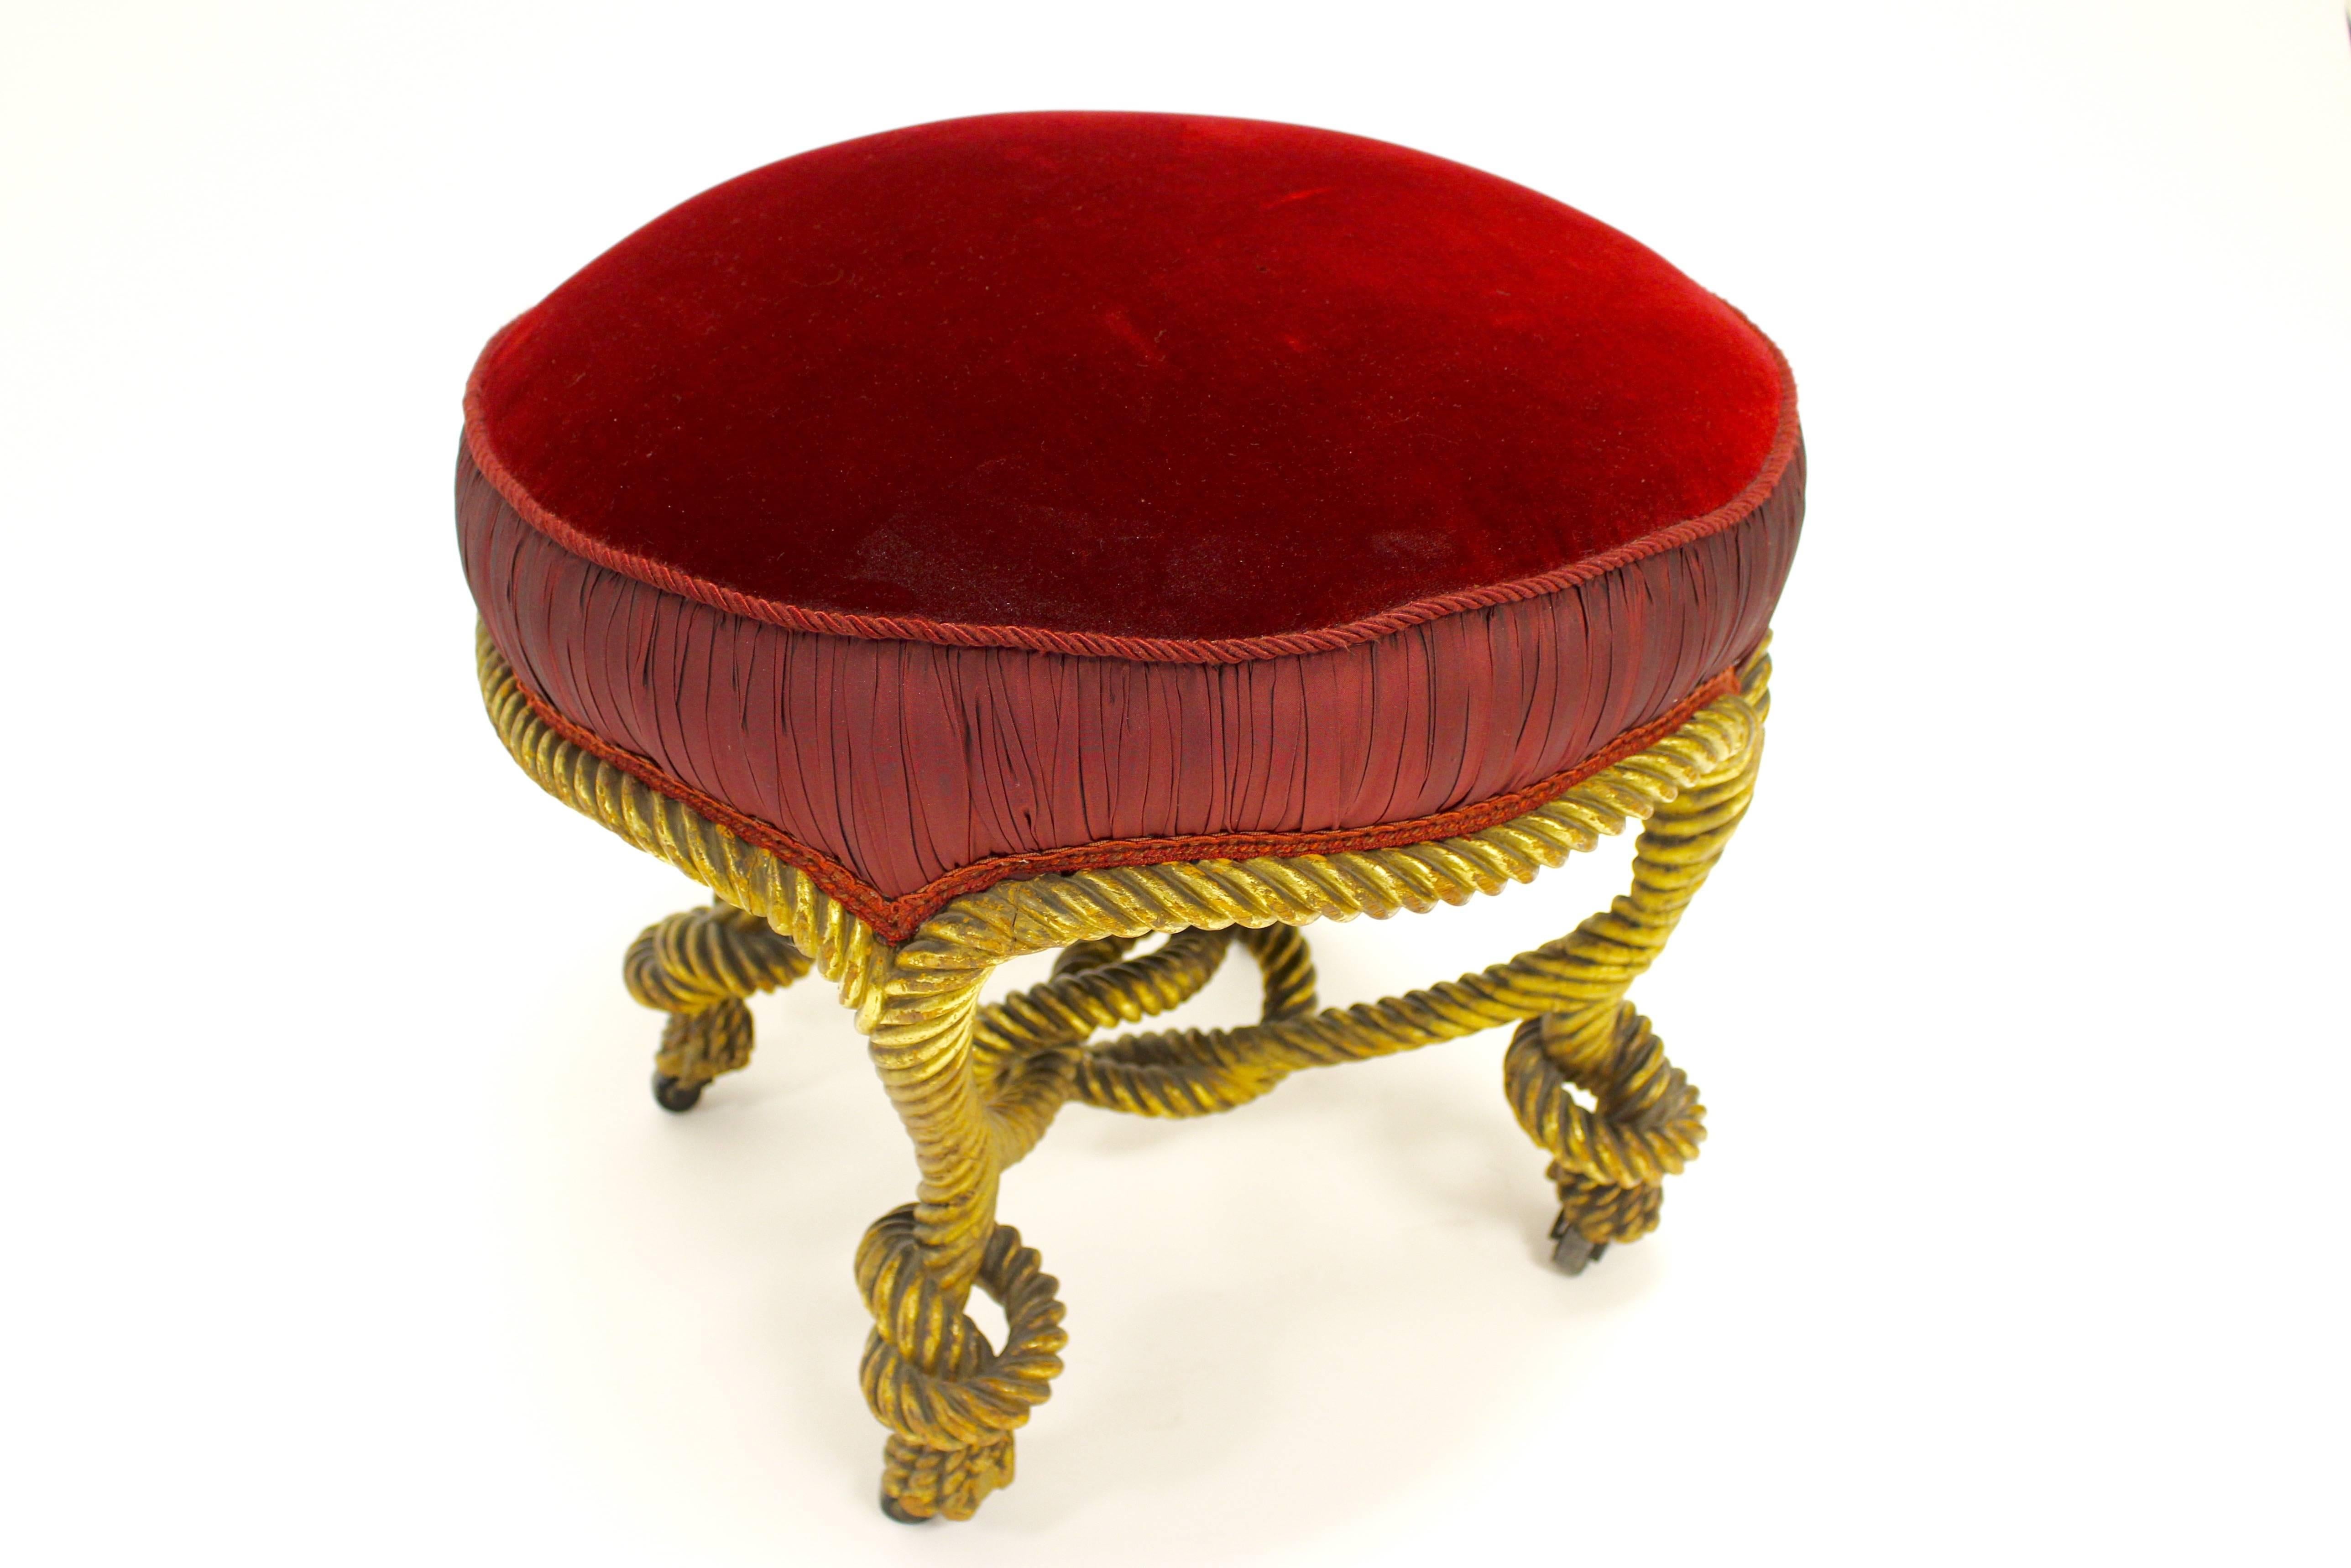 An elegant Napoleon III style giltwood rope stool with a circular padded seat upholstered in a red velvet fabric. Gorgeous gathers adorn the outer edge of the seat, flanked by rope-like and scalloped edge trims. After a design by Fournier, one of